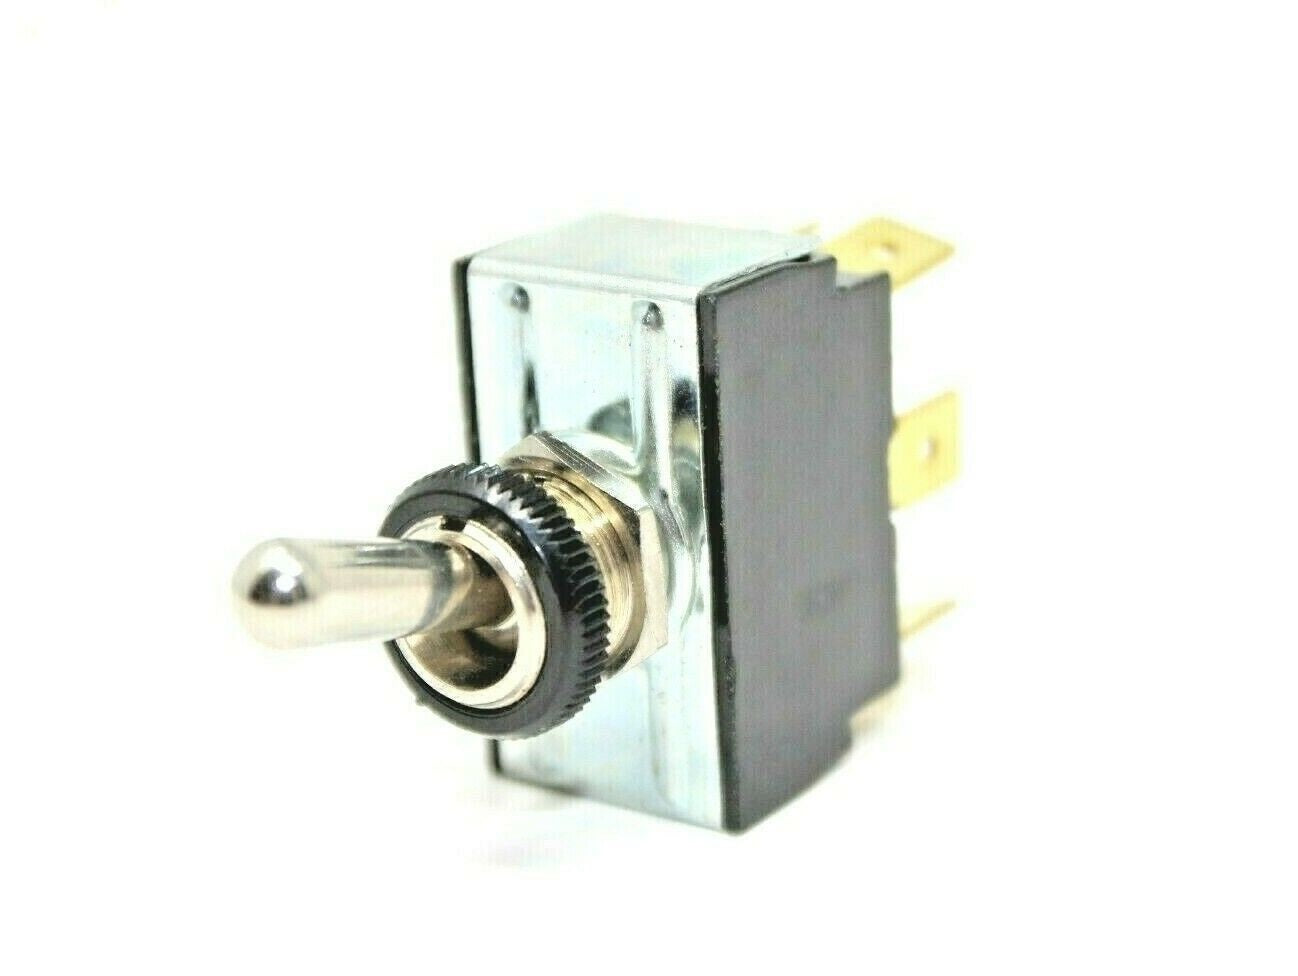 Carling 3 Position Toggle Switch 71R0200 Fan Control